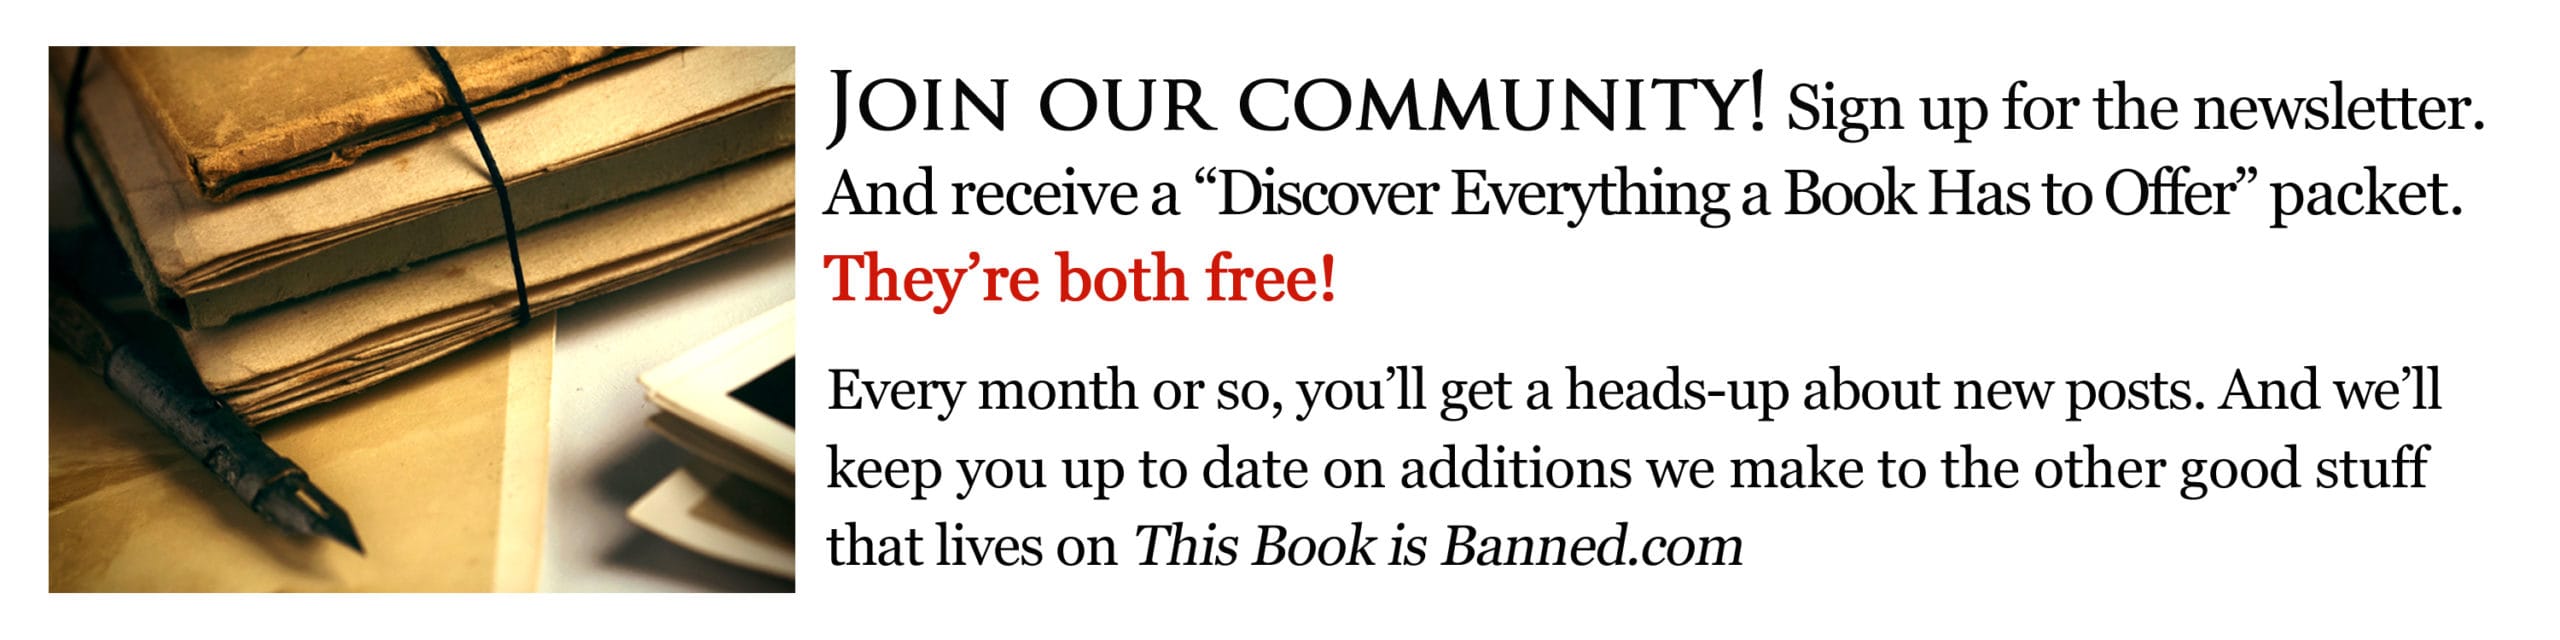 This Book is Banned - newsletter sign-up block